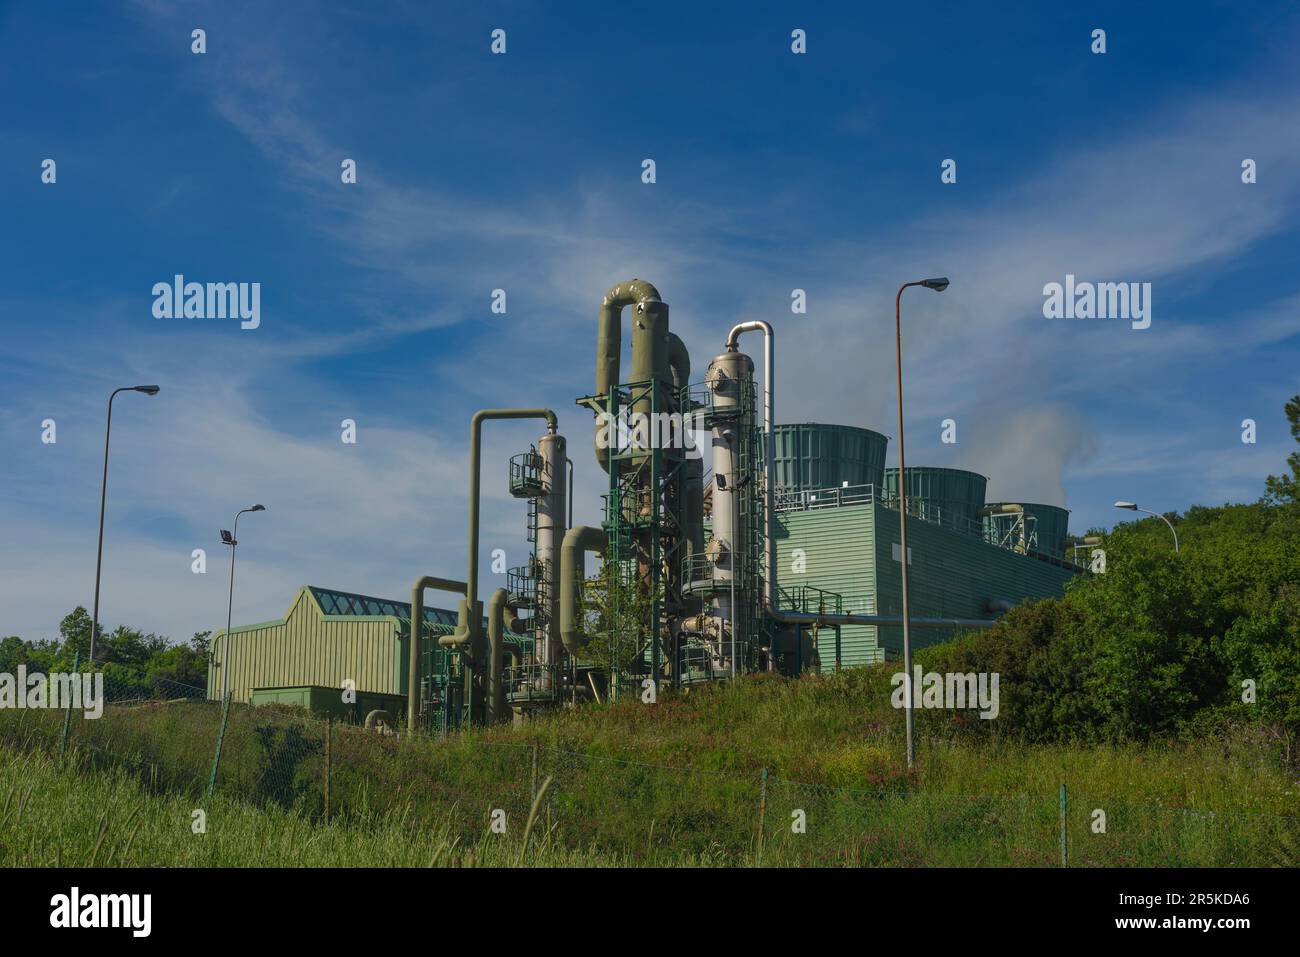 Cornia 2 plant  Mixed geothermal plant, biomass, Castelnuovo Val di Cecina, Tuscany Italy. Combustion of biomass, production of electricity Stock Photo